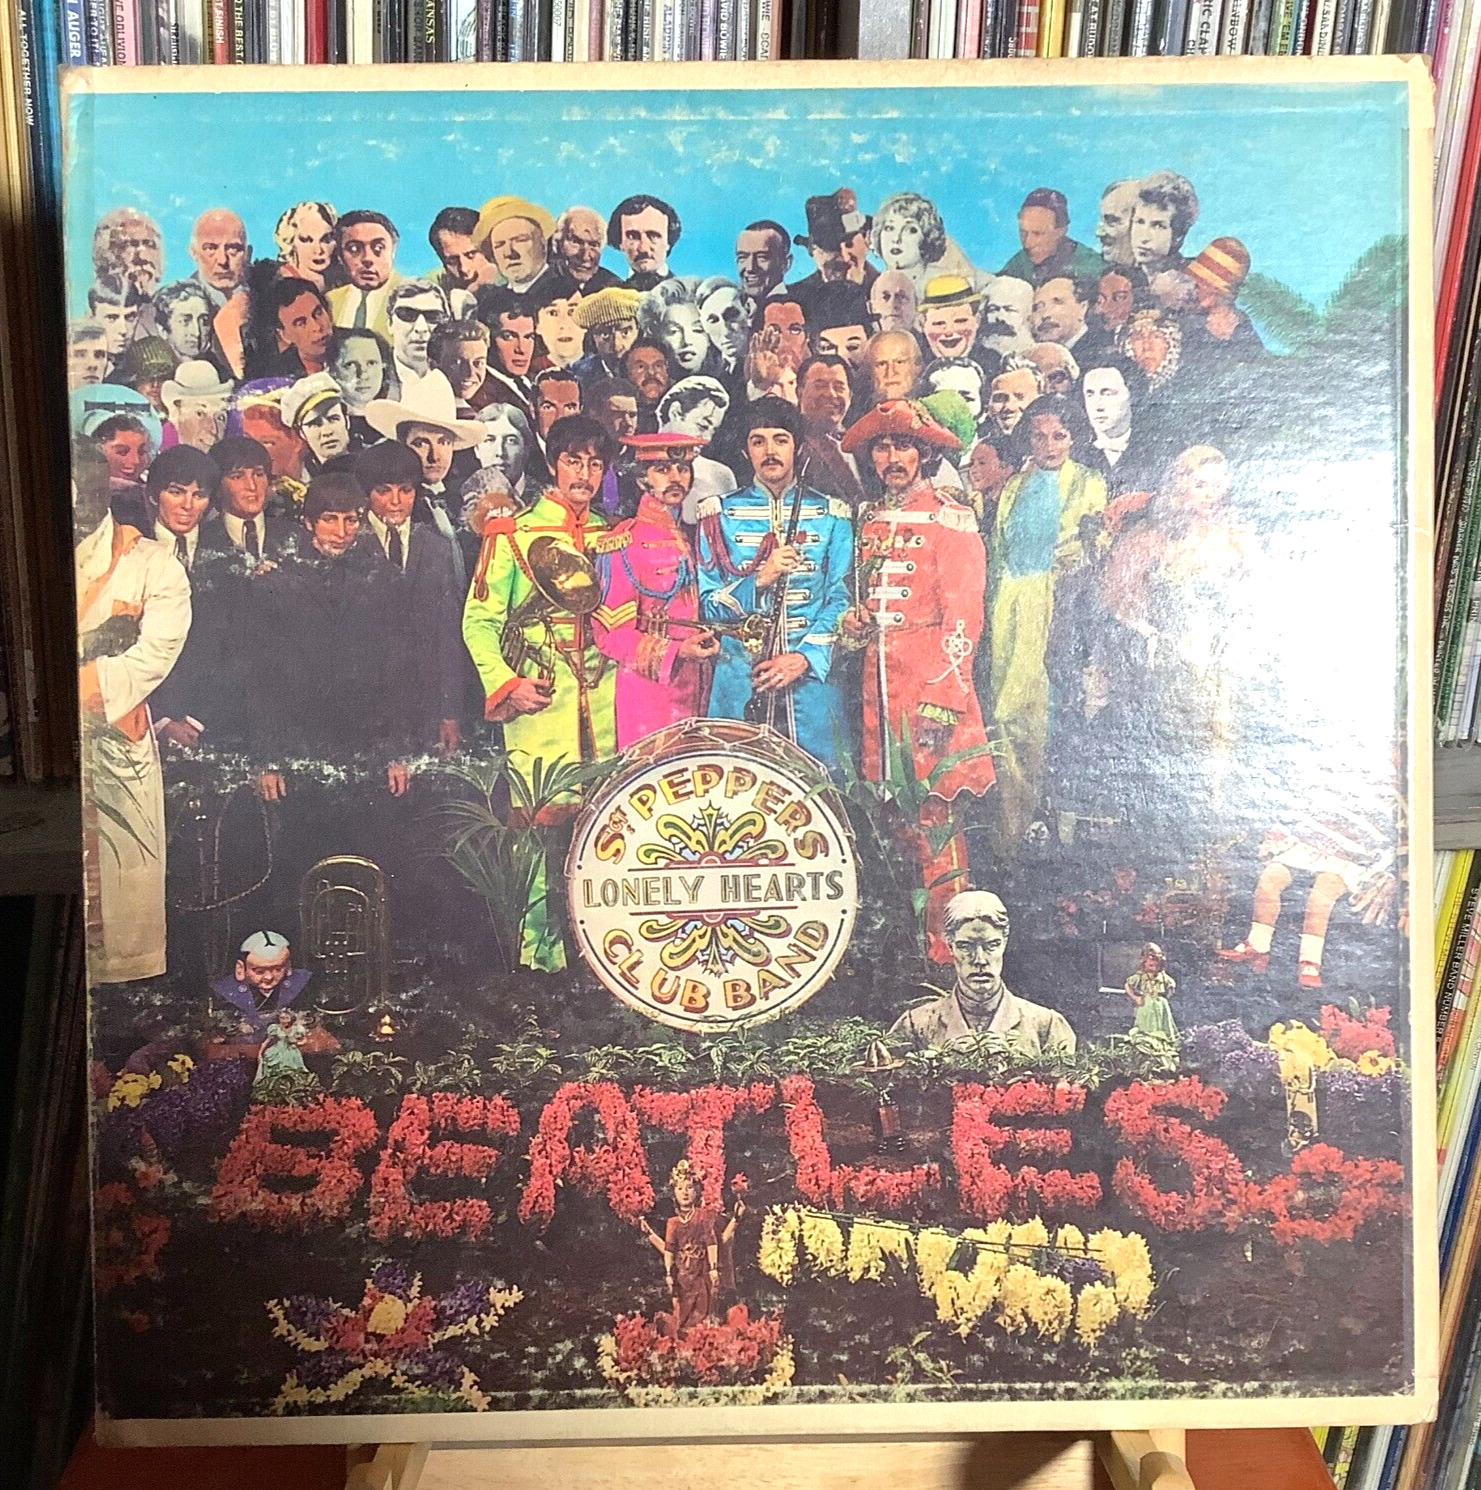 Tested:  The Beatles - Sgt. Pepper's Lonely Hearts Club Band MONO LP